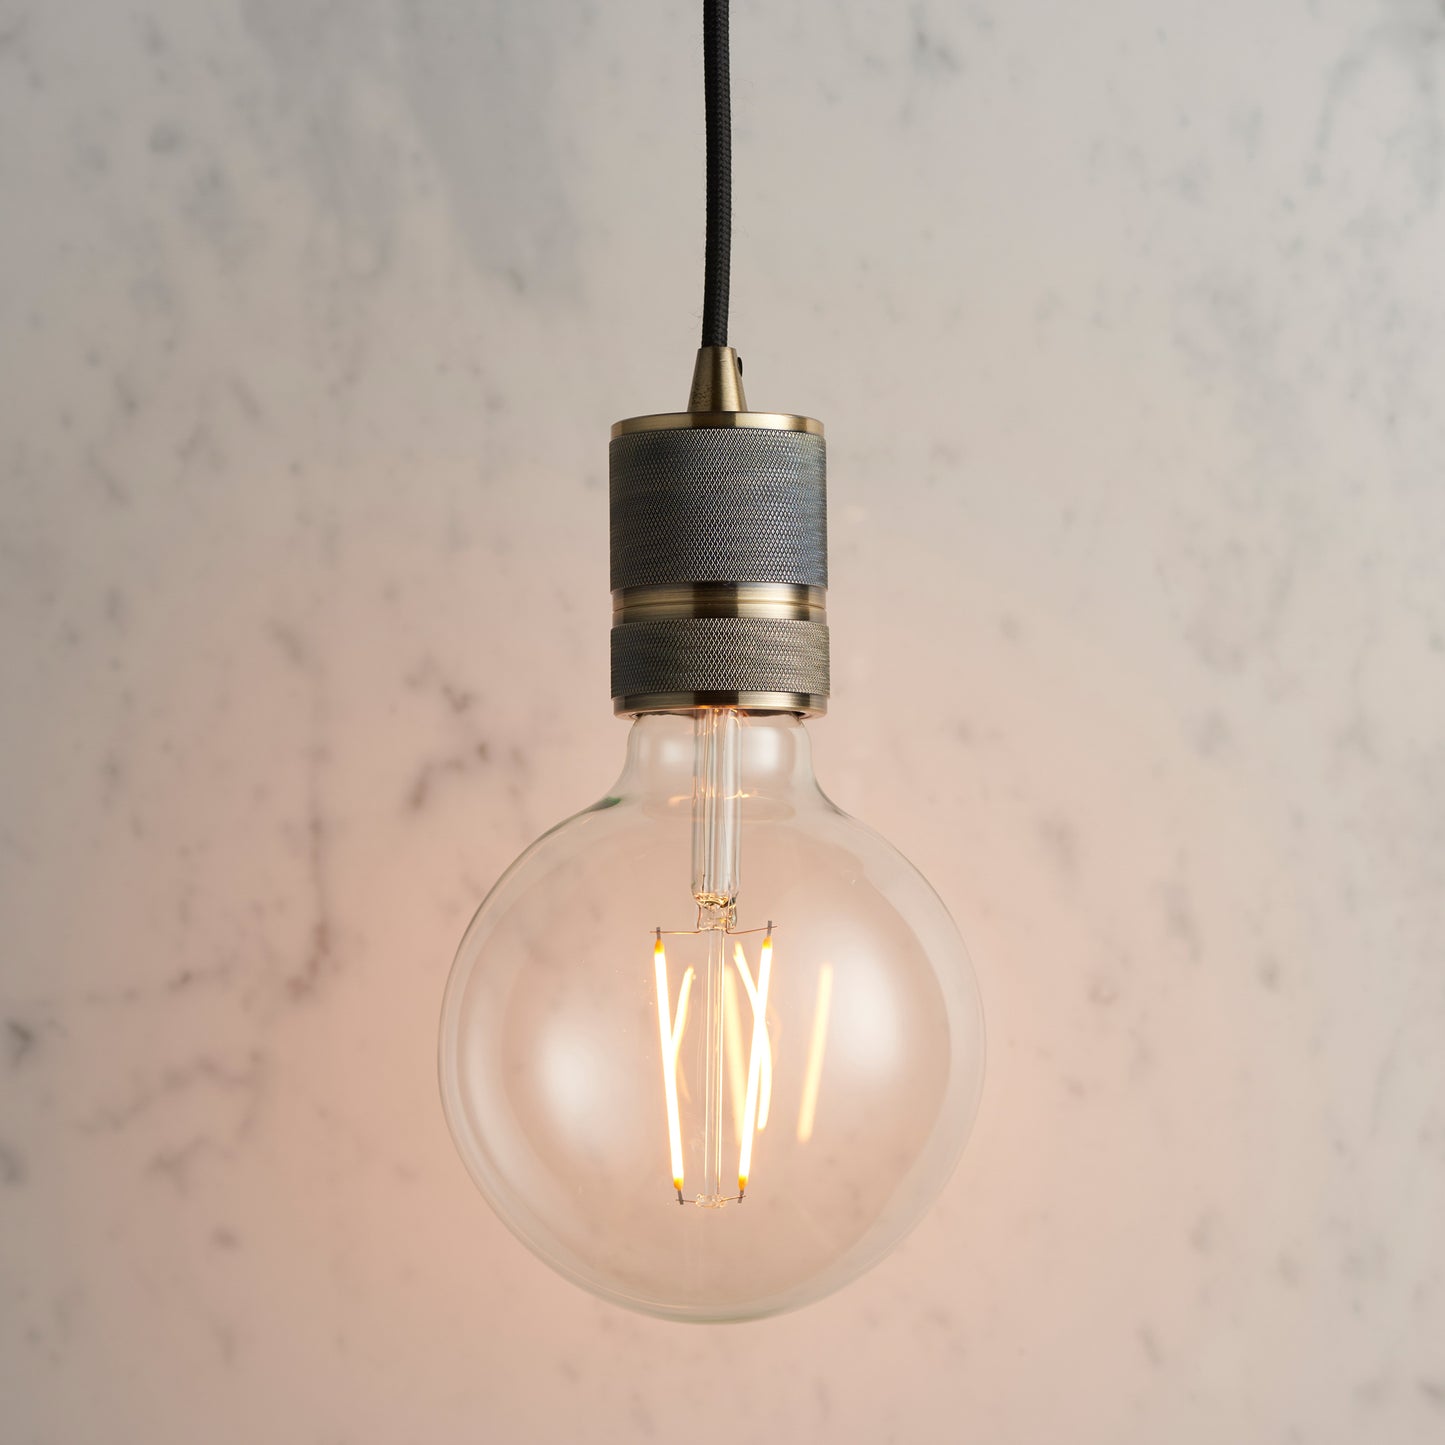 An Urban Pendant Light with an Antique Brass finish, hanging on a marble counter, perfect for interior decor.